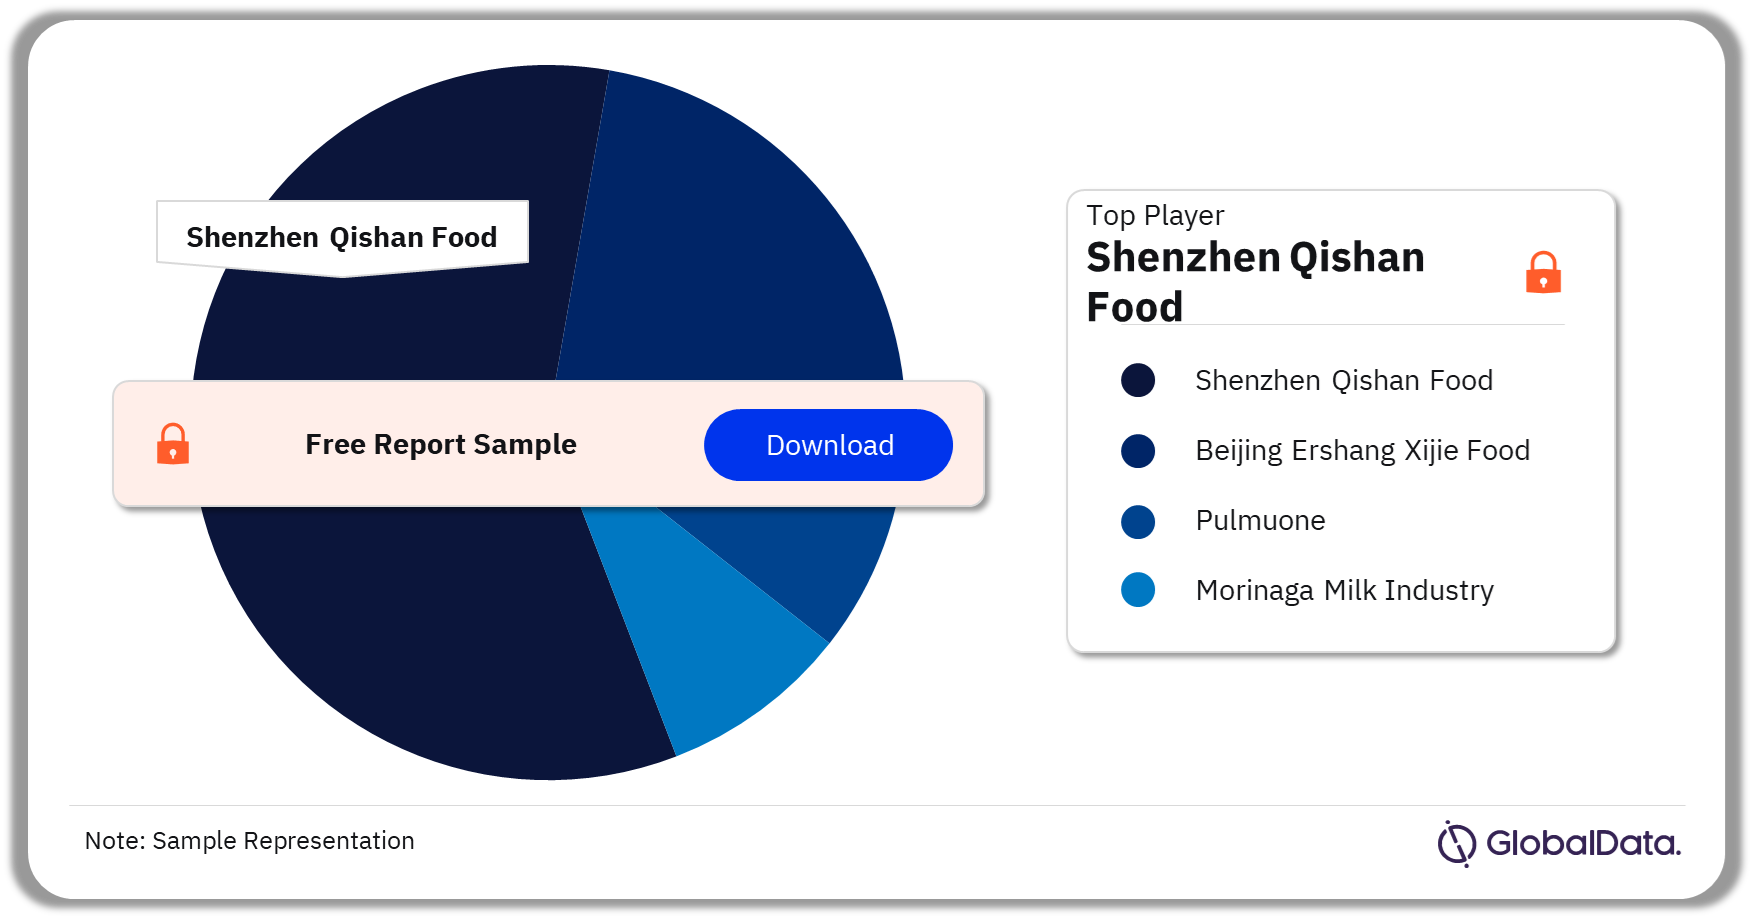 China Meat Substitutes Market, by Brands, 2022 (%)